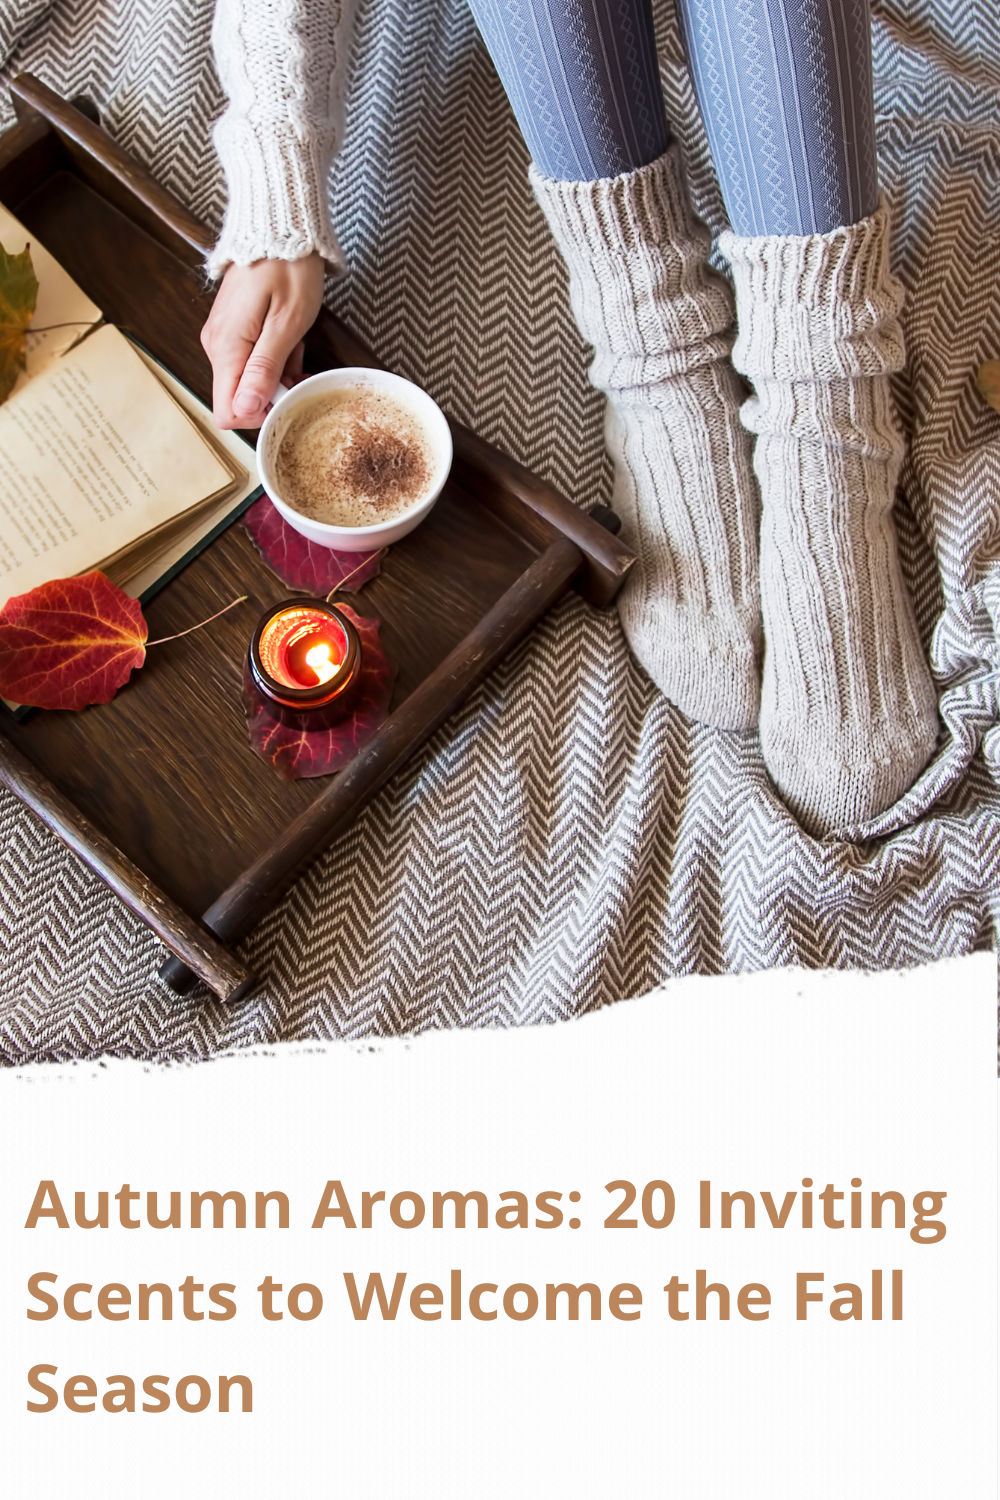 Autumn Aromas: 20 Inviting Scents to Welcome the Fall Season